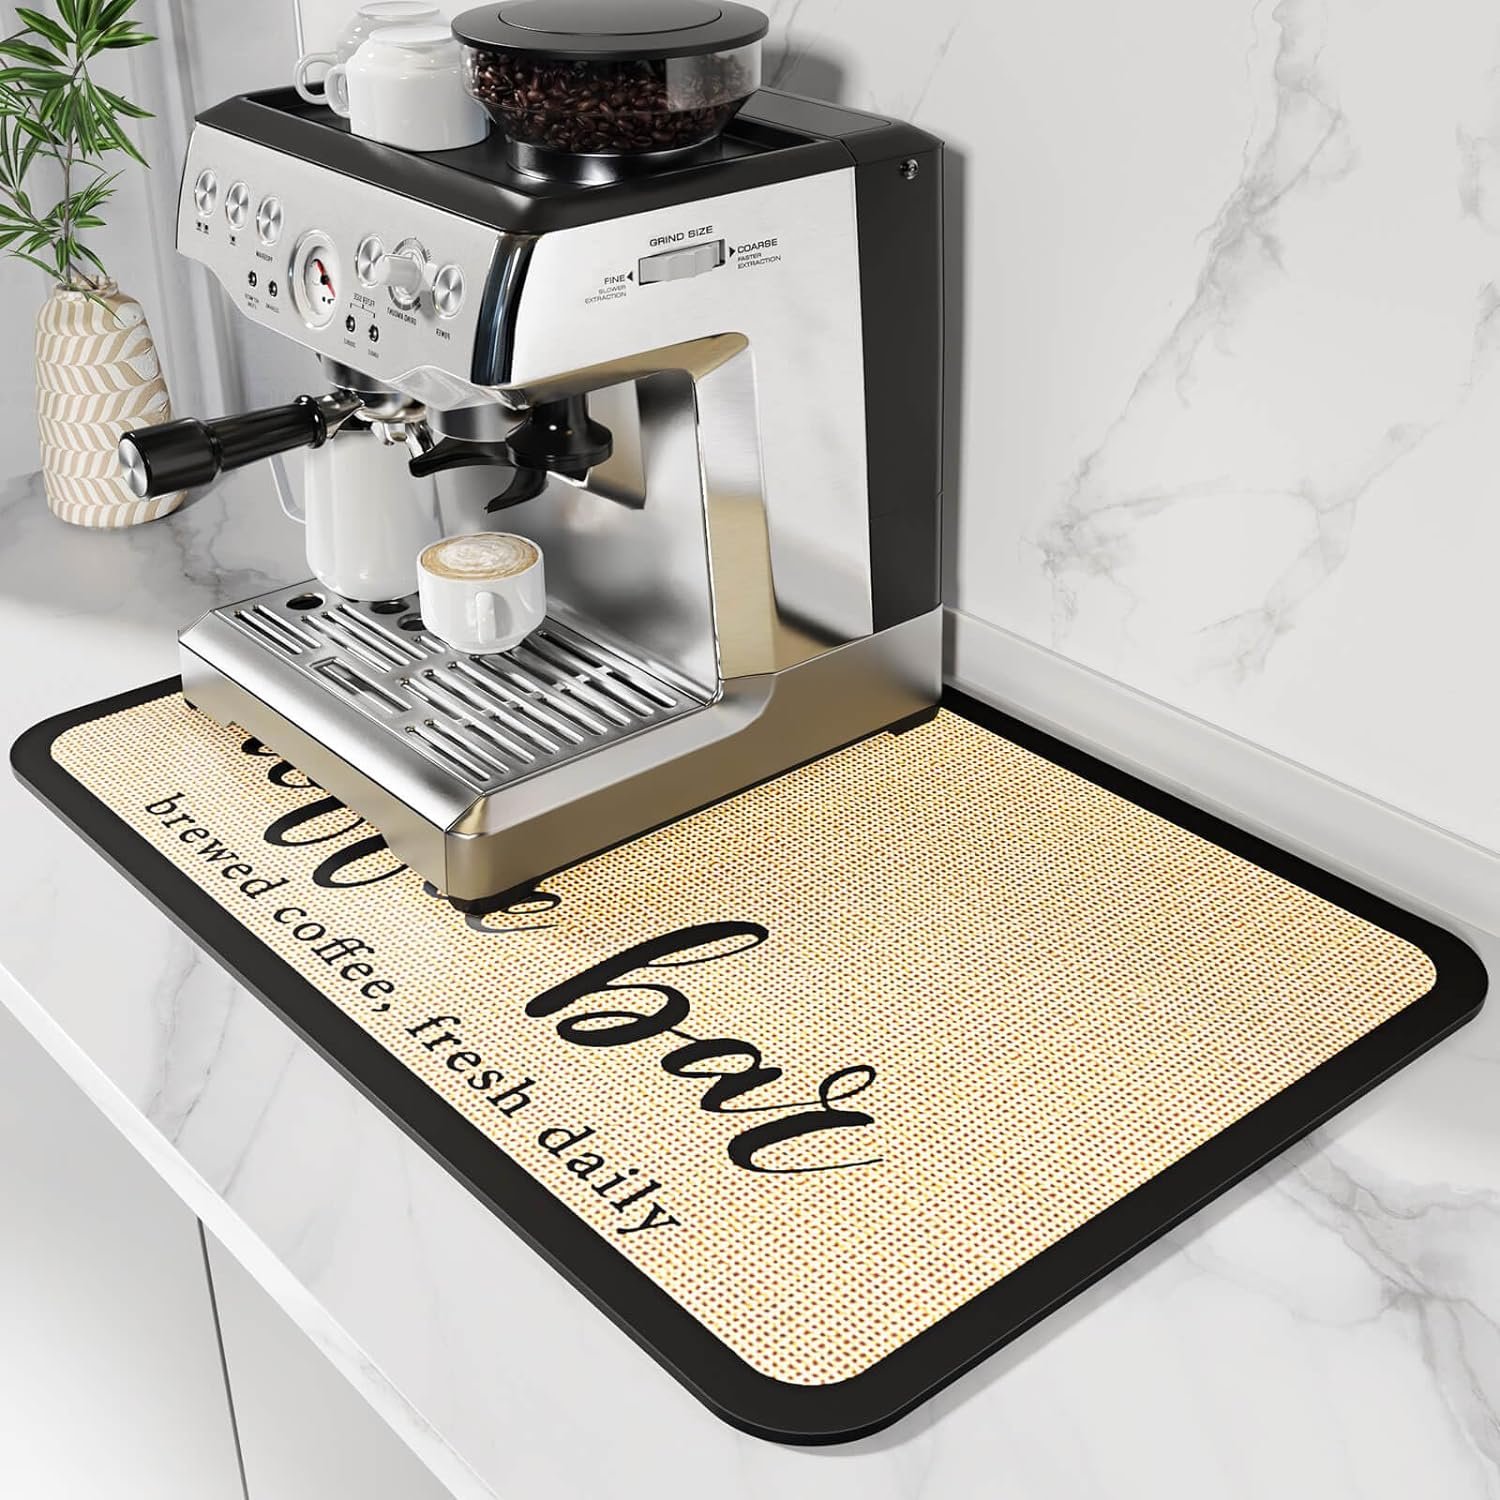 dk177 coffee mat coffee bar mat hide stain absorbent drying mat with waterproof rubber backing fit under coffee maker co